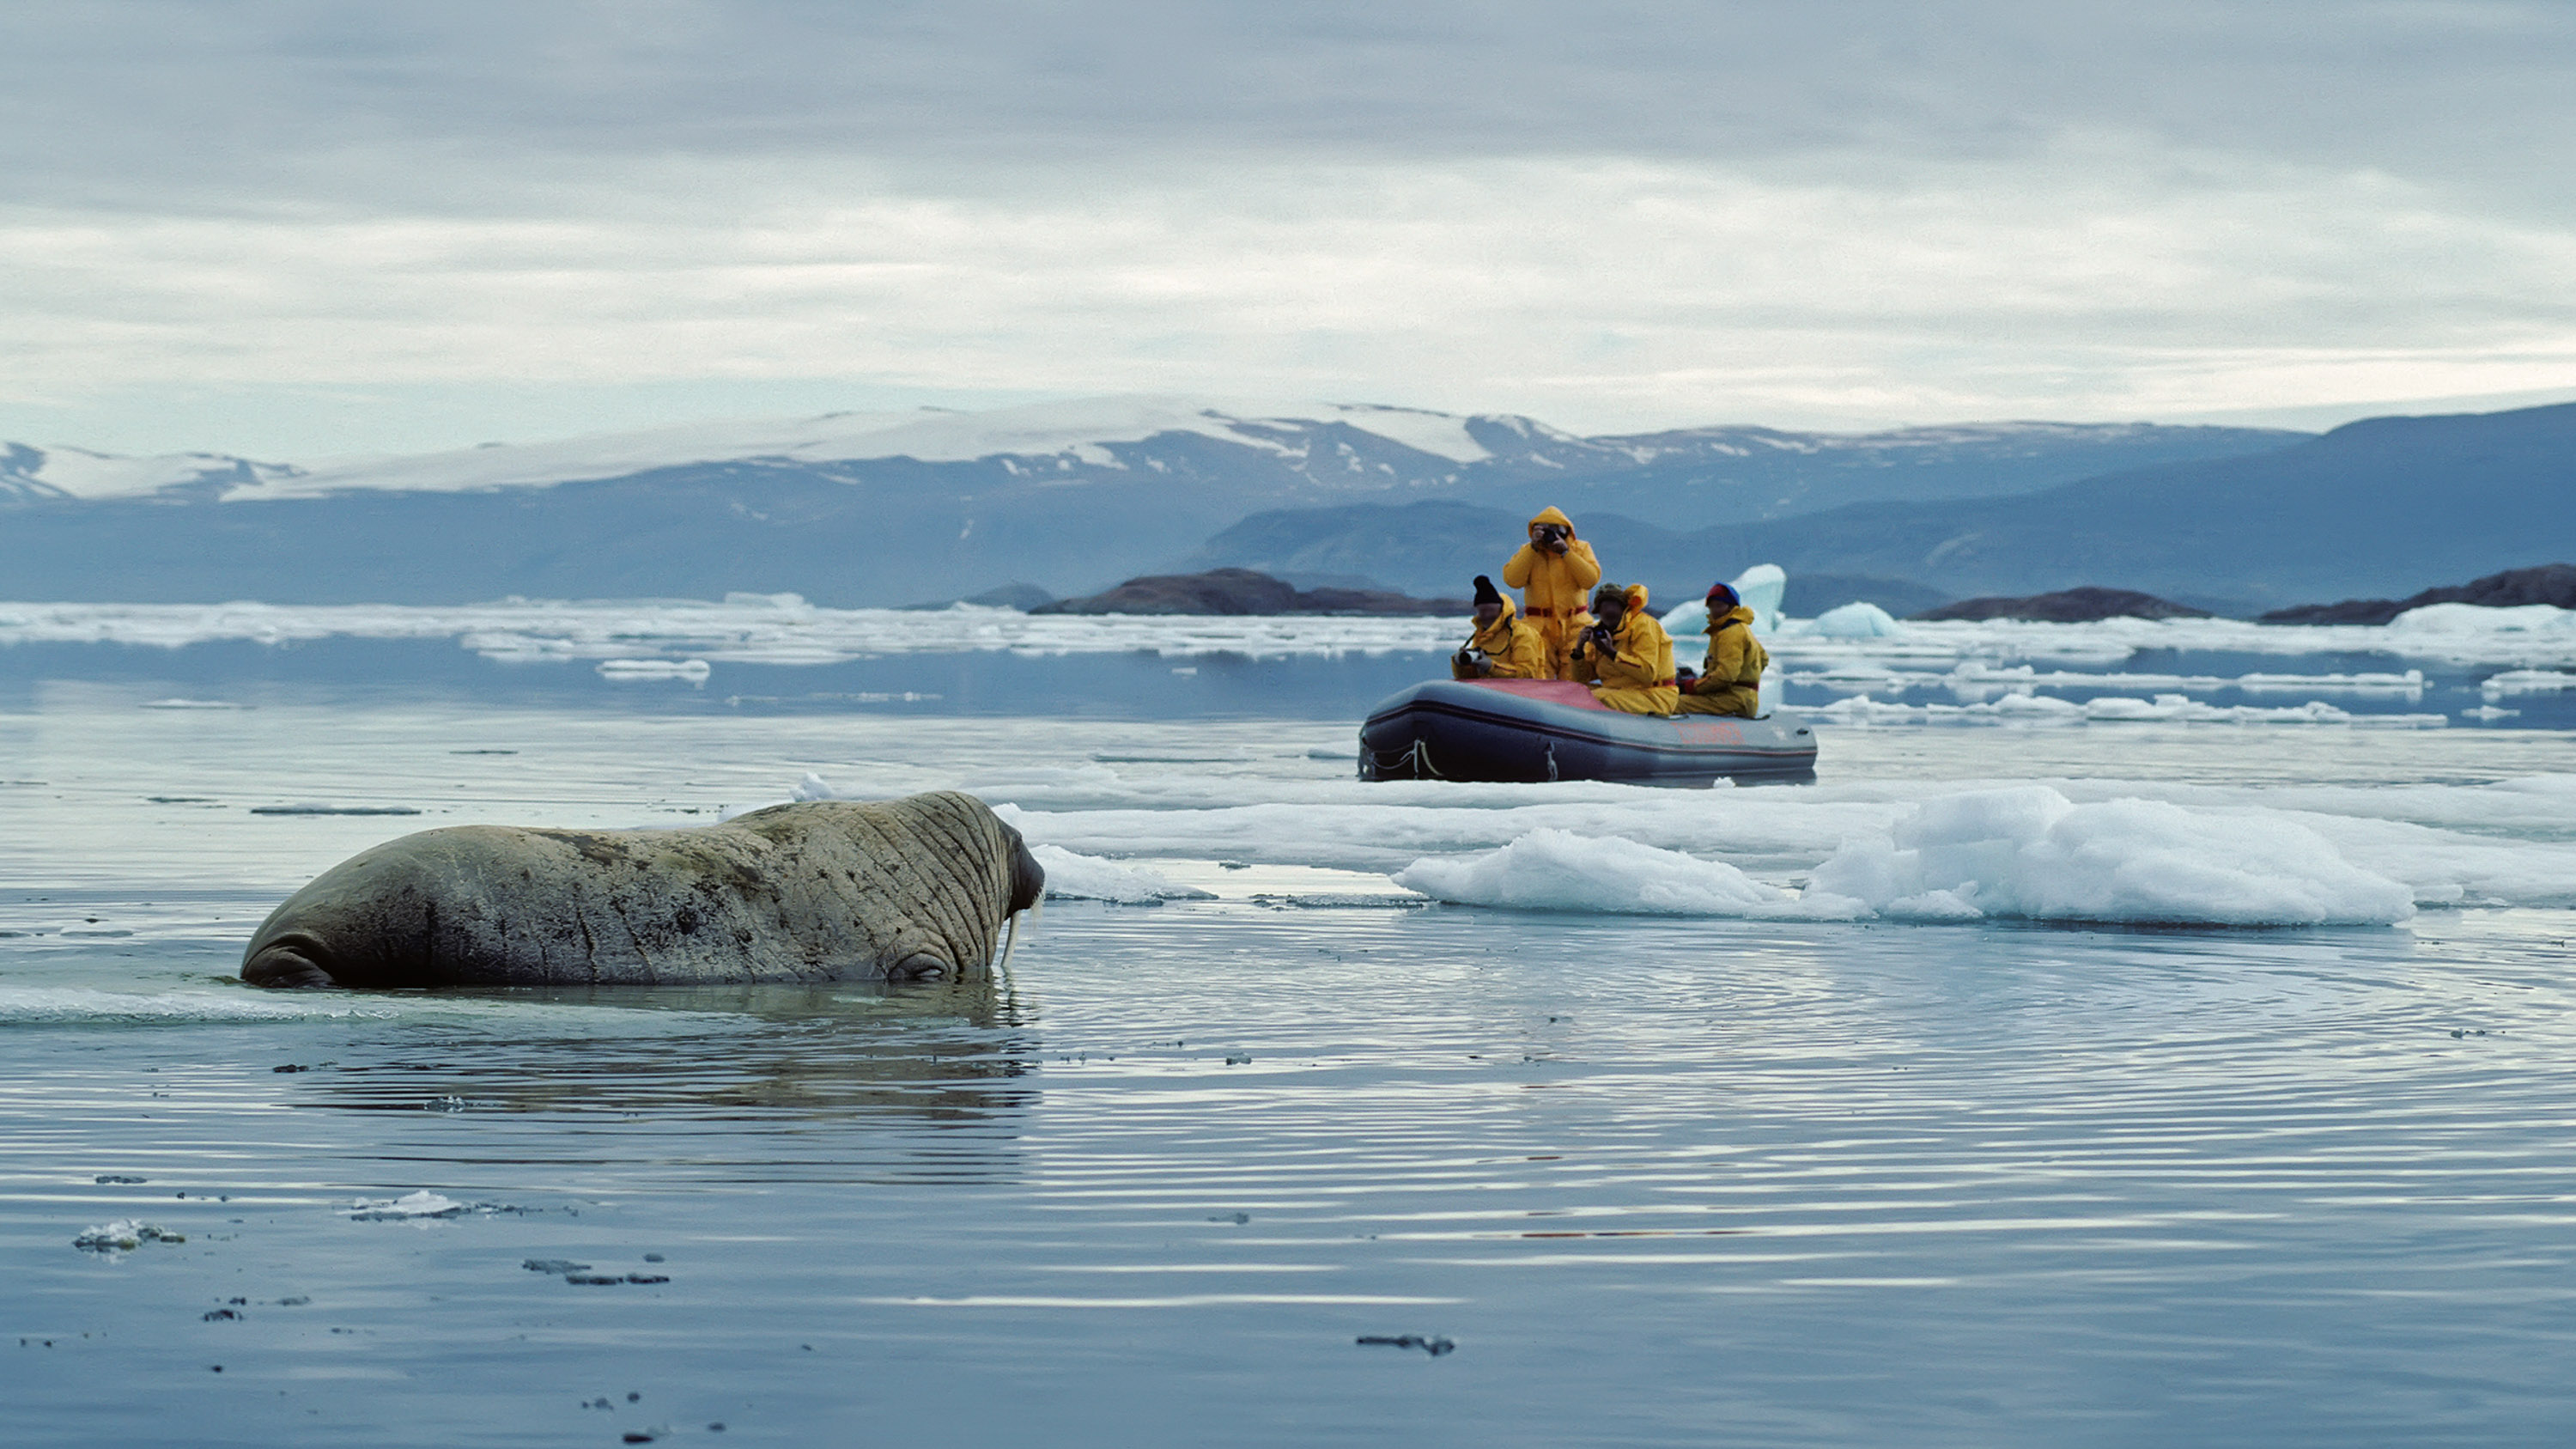 <p><strong>Estimated cost: </strong>$39,900</p> <p>Want to experience a one-of-a-kind vacation in Canada? Take a journey lasting over three weeks with a seasoned expedition team on the <a href="https://www.nationalgeographic.com/expeditions/destinations/polar/ocean/epic-voyage-to-the-far-north/" rel="noreferrer noopener">National Geographic Explorer cruise ship</a> to Ellesmere Island. Home to polar bears, muskox and narwhals, the glacial landscape provides the perfect backdrop to hike, kayak and photograph wildlife.</p> <p><strong>How to get there:</strong> The best way to visit Ellesmere Island is on a summertime expedition. Striking out from Greenland's Western Coast, 25-day expeditions visit Inuit Villages and remote shorelines, including time on Ellesmere Island.</p> <p><strong><em>Also: <a href="https://www.gobankingrates.com/saving-money/travel/tips-for-saving-money-on-airfare-this-spring/?utm_term=related_link_5&utm_campaign=1224529&utm_source=msn.com&utm_content=7&utm_medium=rss" rel="">10 Tips for Saving Money on Airfare This Spring</a></em></strong></p>